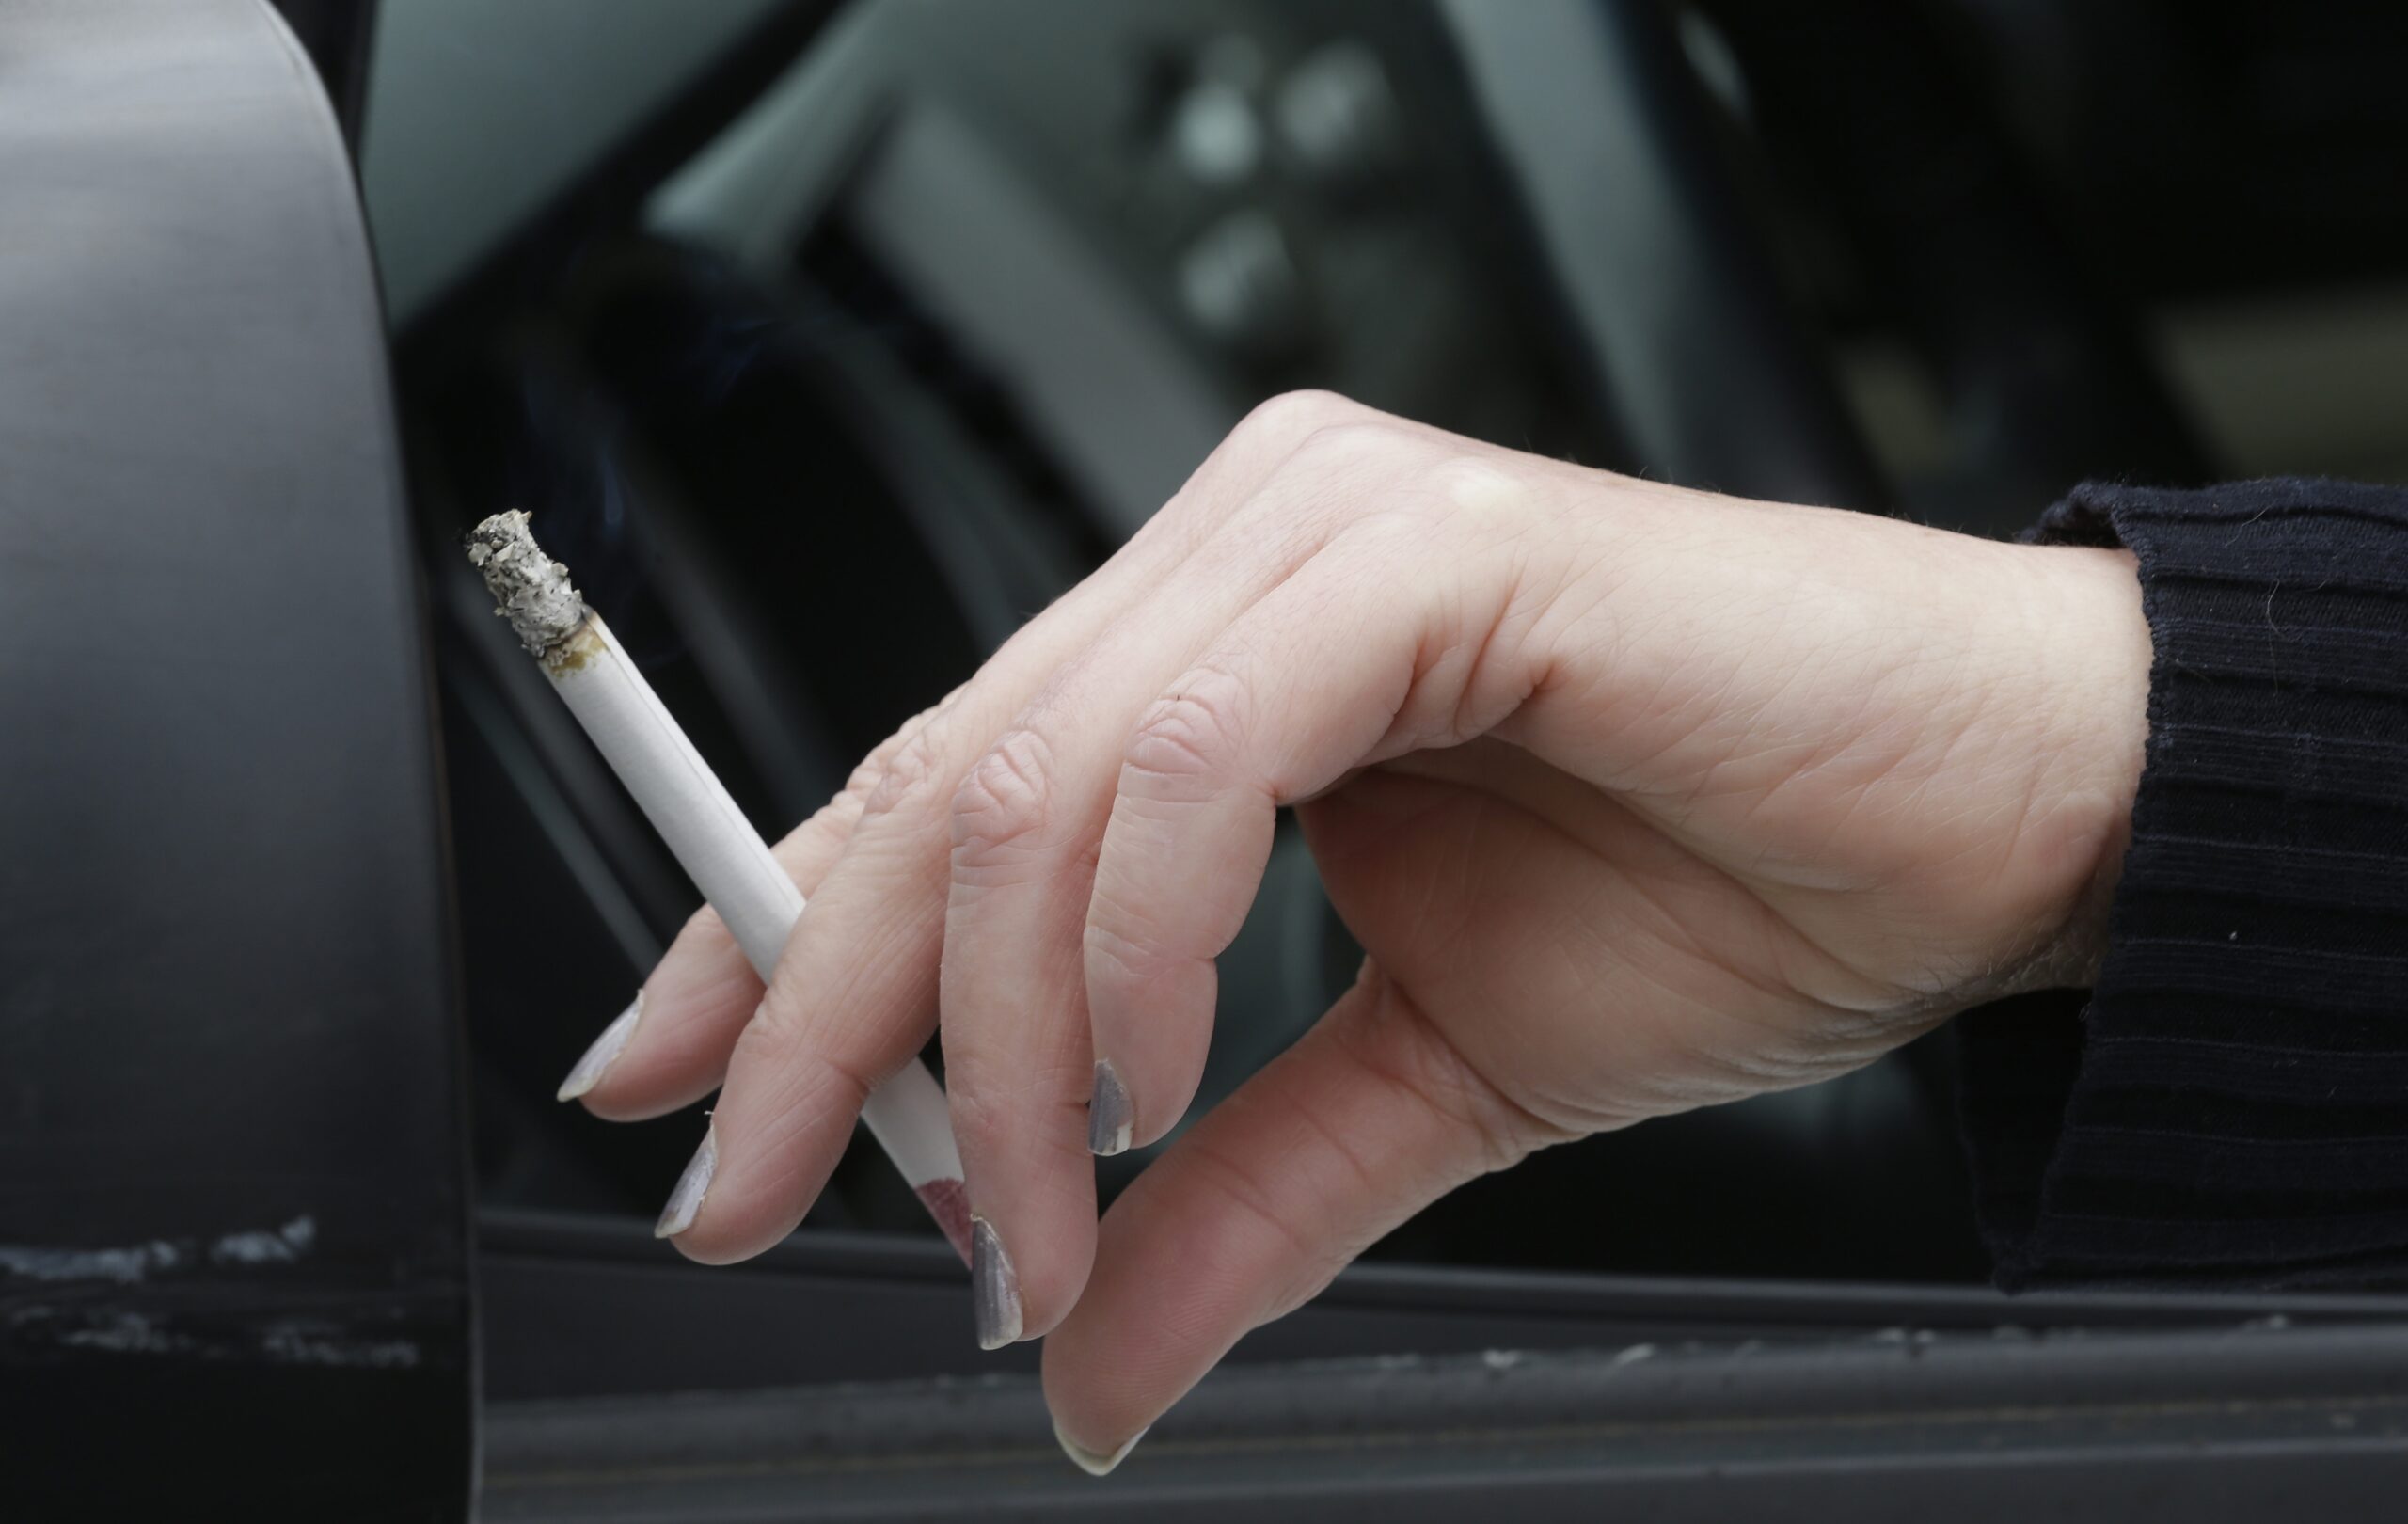 1 In 9 Wisconsin Women Smoke While Pregnant